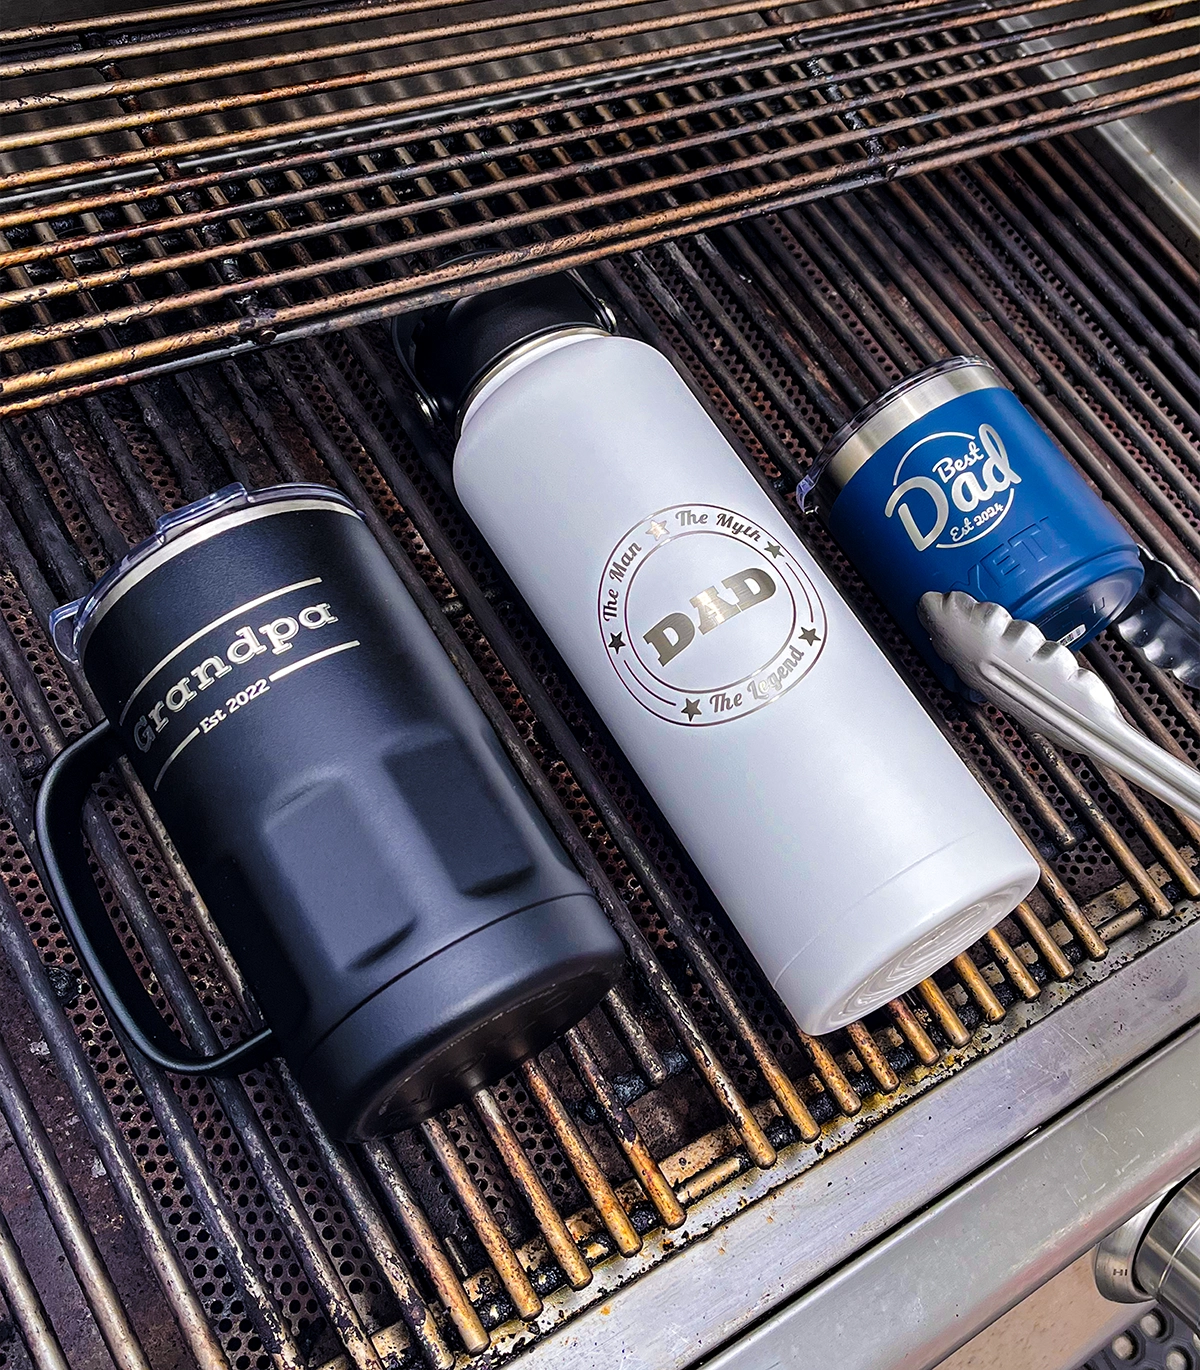 engraved mug and bottle on a grill personalized for father's day